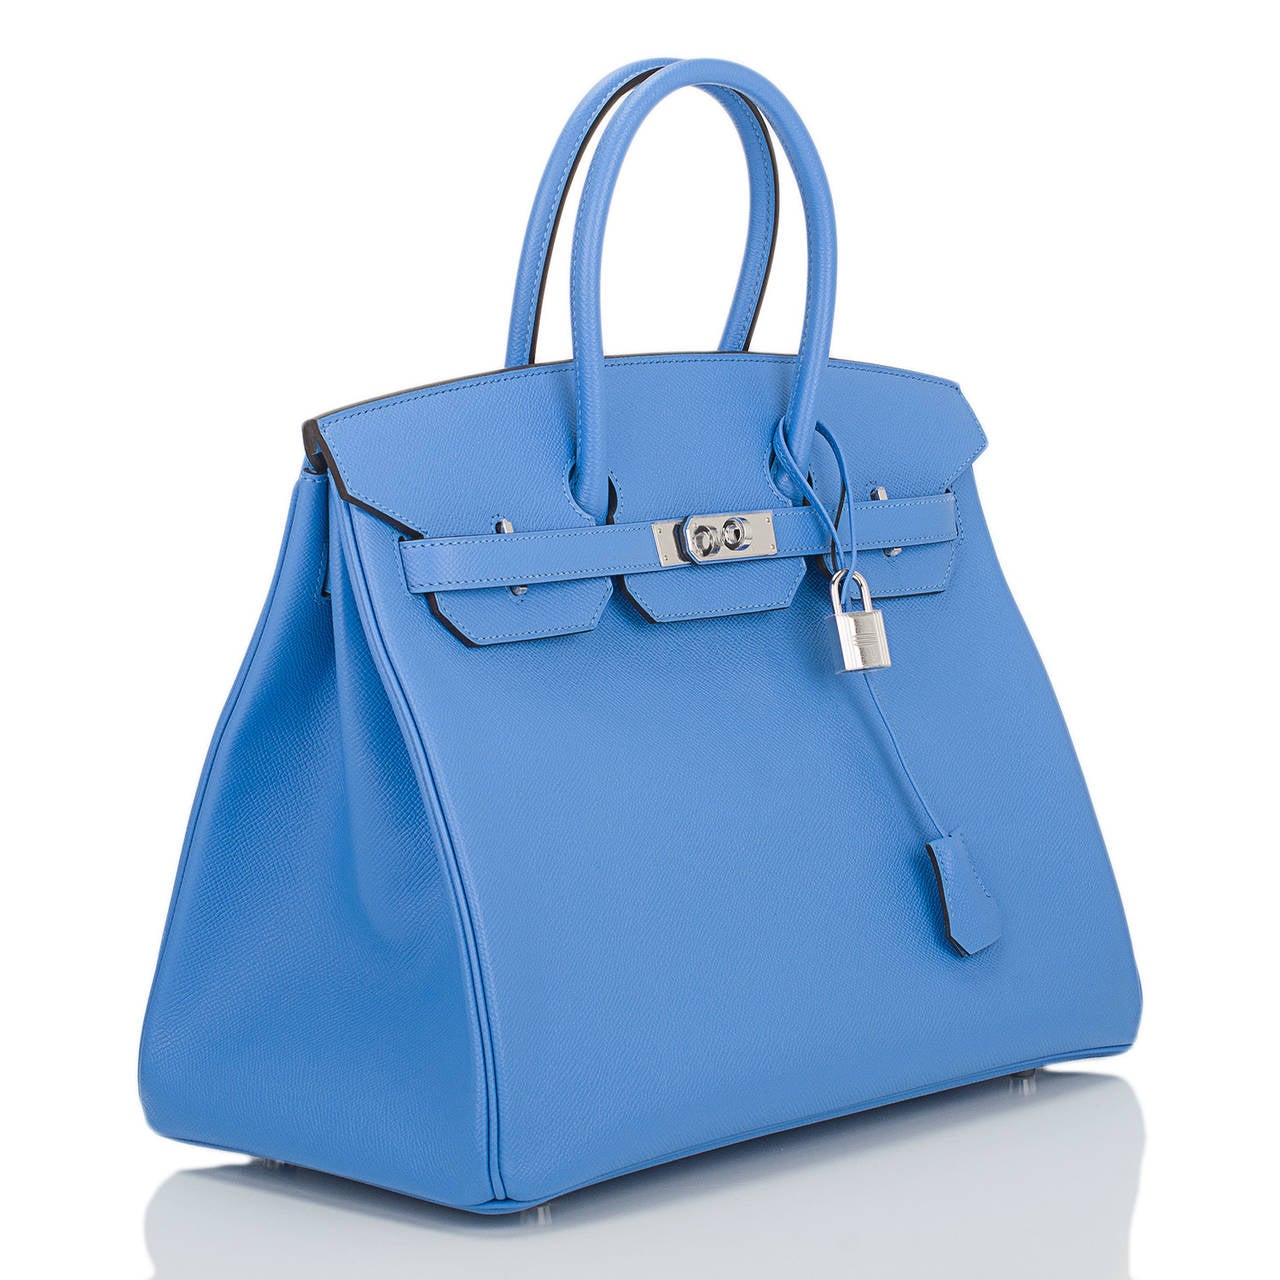 Hermes Blue Paradise Birkin 35cm in epsom leather with palladium hardware.

This Birkin features tonal stitching, front toggle closure, clochette with lock and two keys, and double rolled handles. The interior is lined in Blue Paradise chevre with